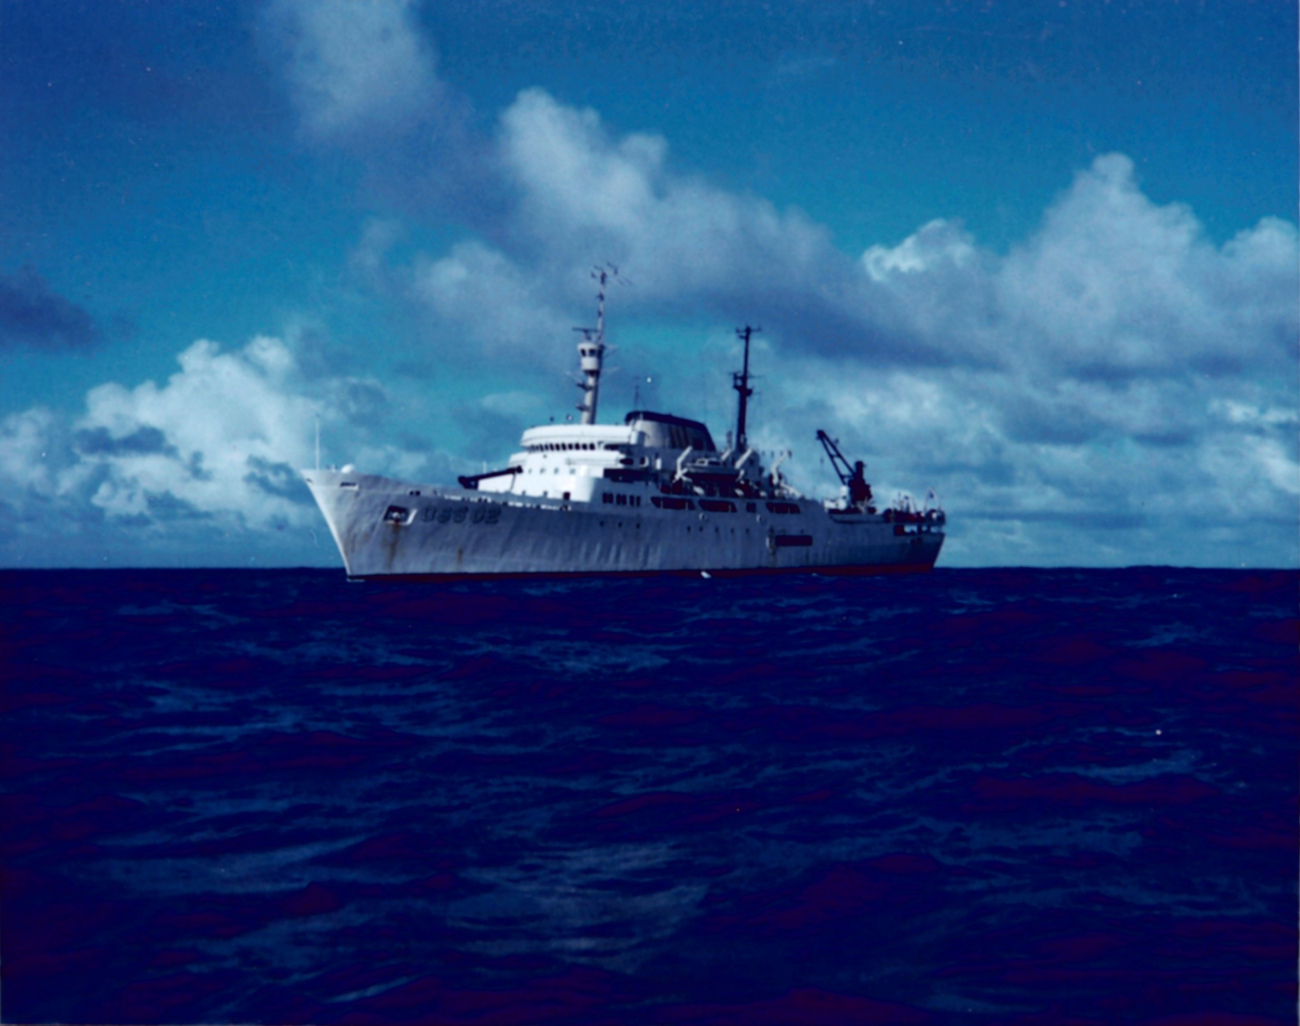 NOAA Ship DISCOVERER in the equatorial Pacific Ocean